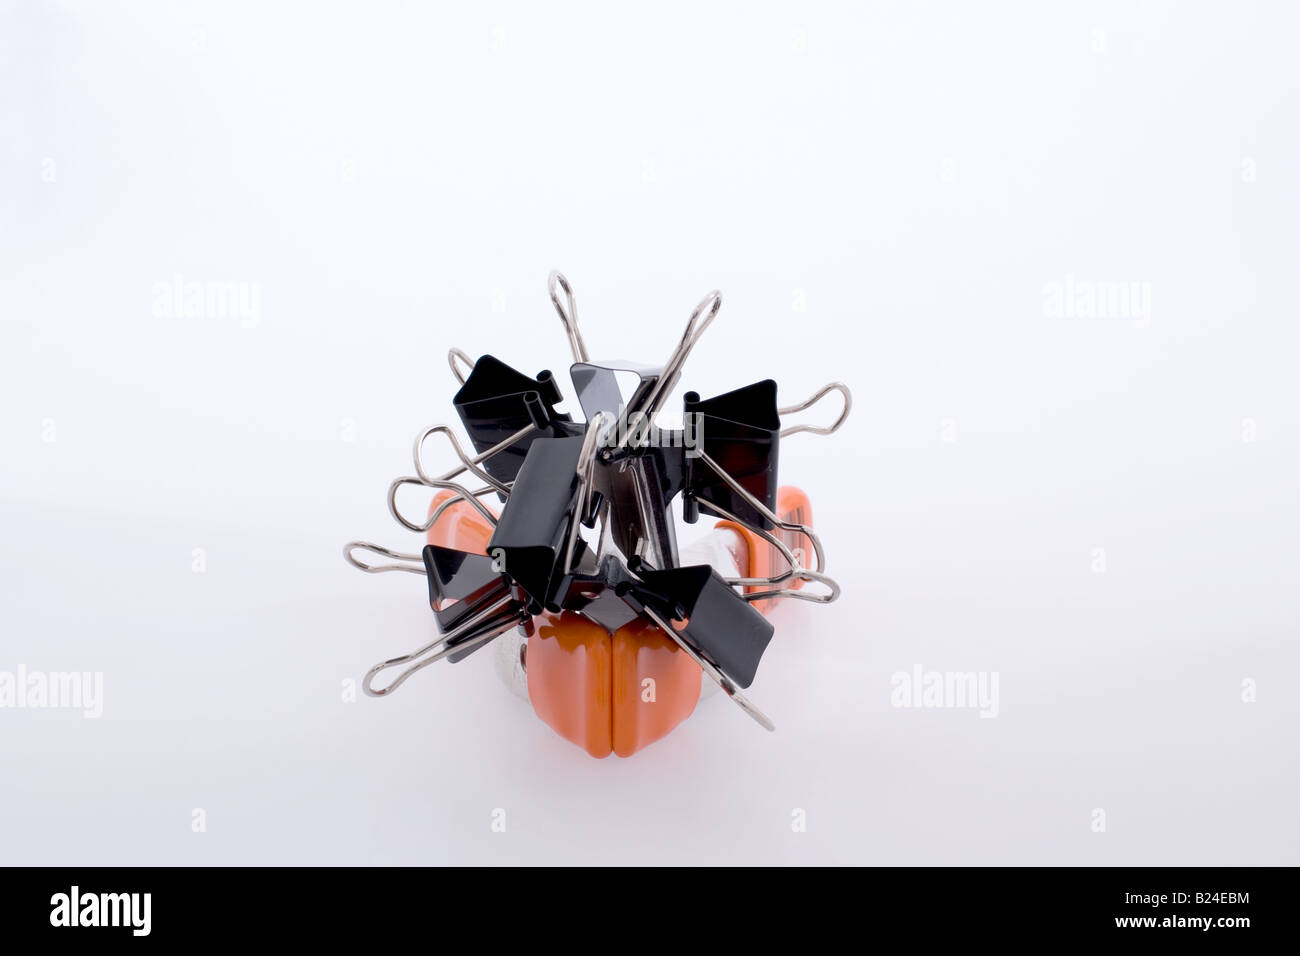 Black binder clips joined together atop a orange metal studio clip Stock Photo